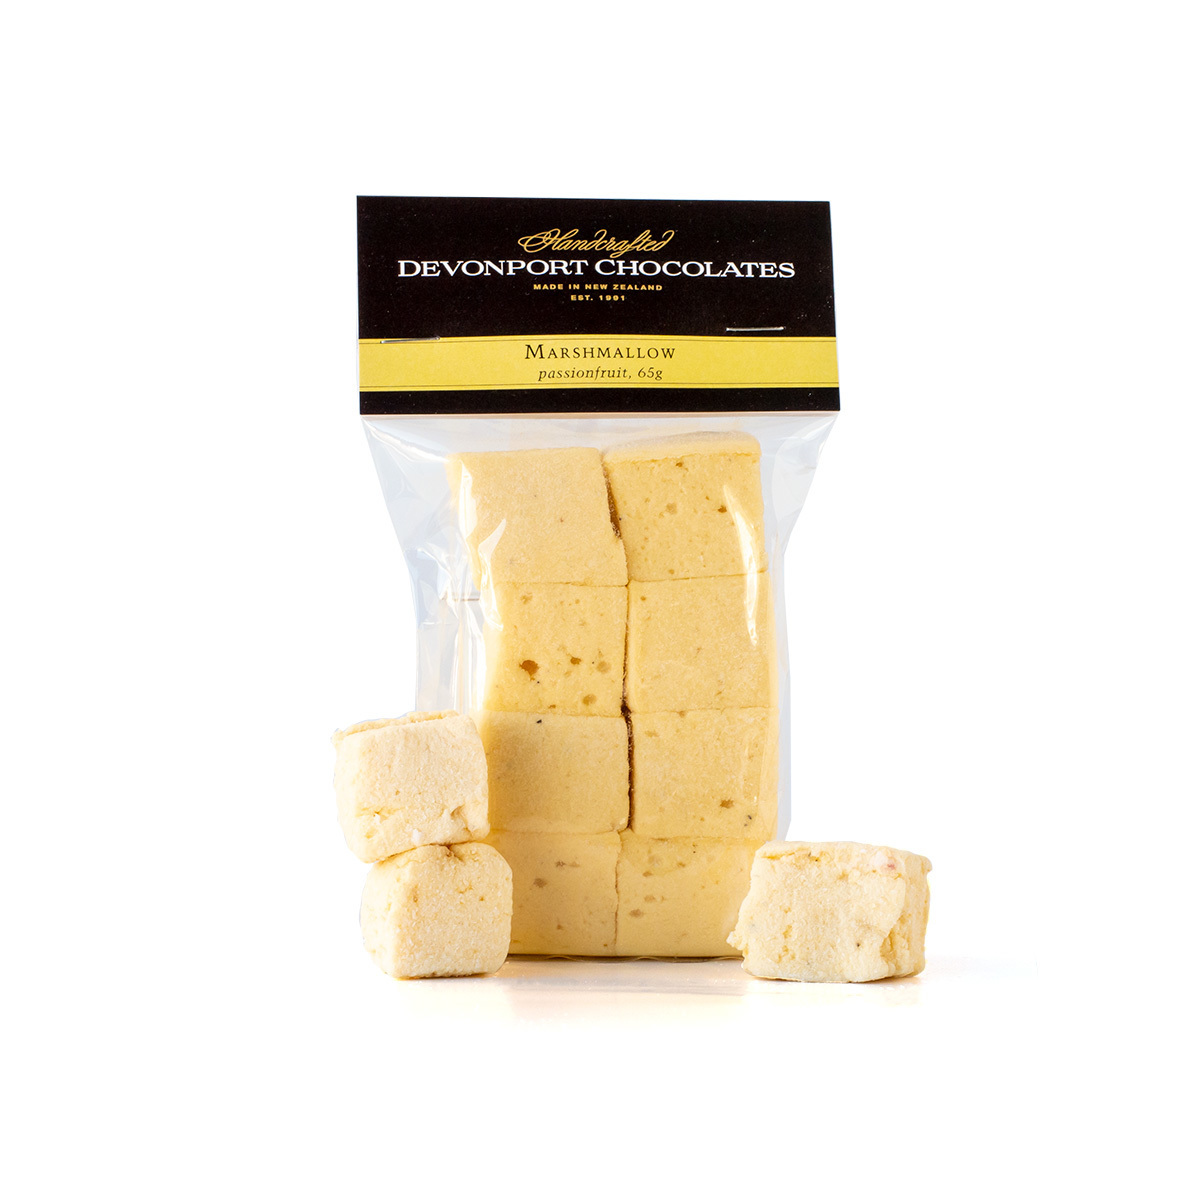 Marshmallow, Passionfruit - NEW PRODUCT!